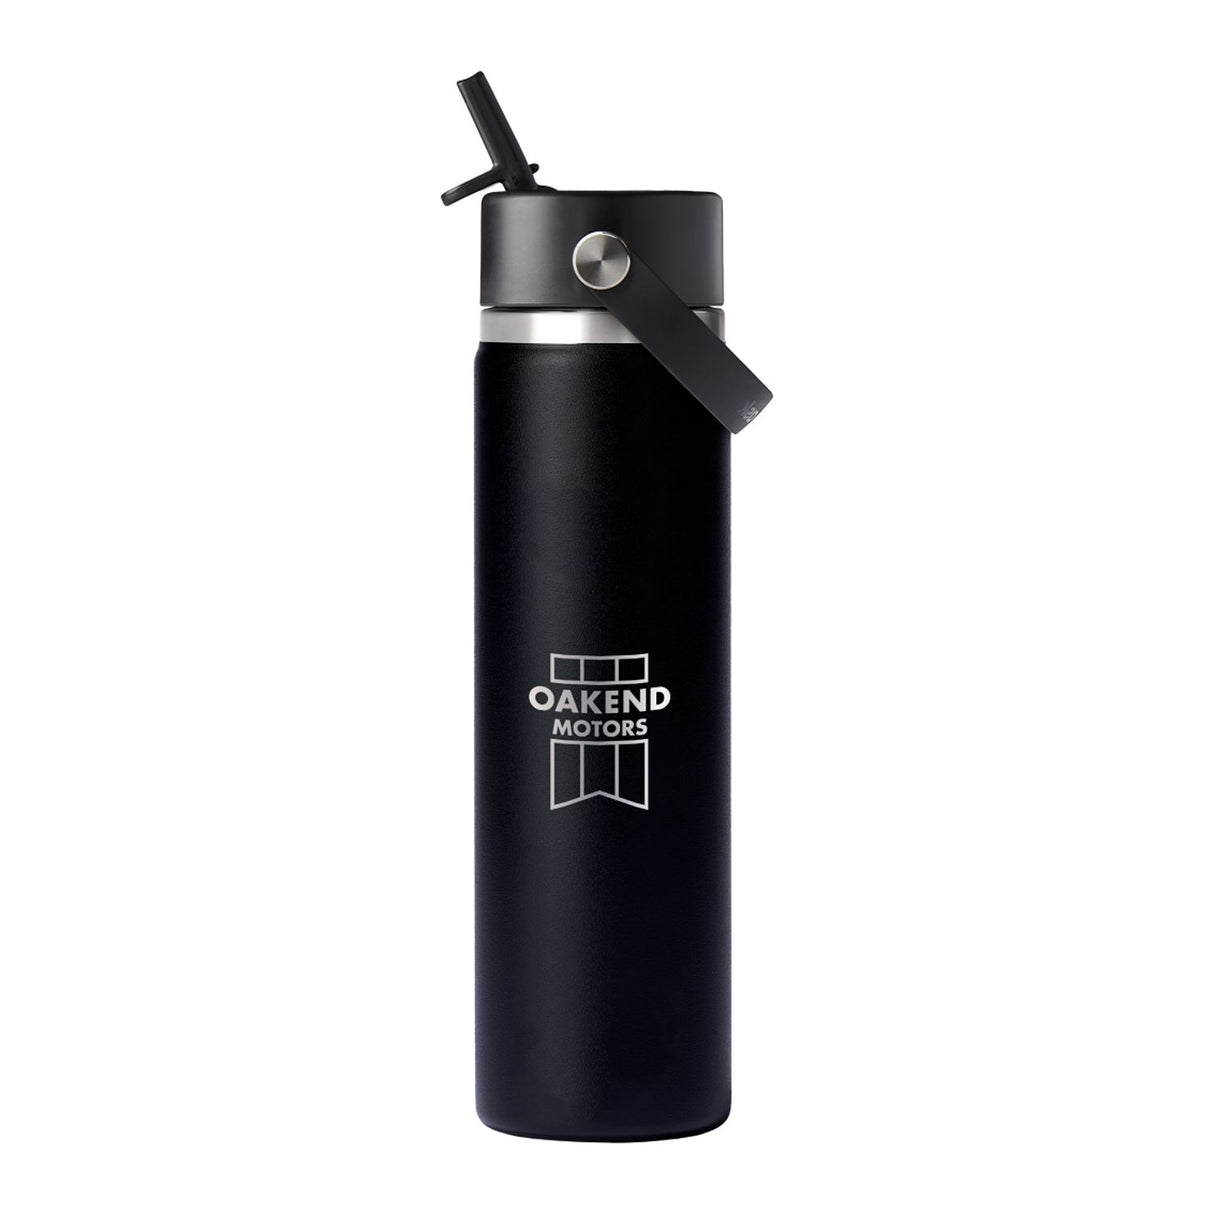 Hydro Flask Wide Mouth 24oz Bottle with Flex Straw Cap